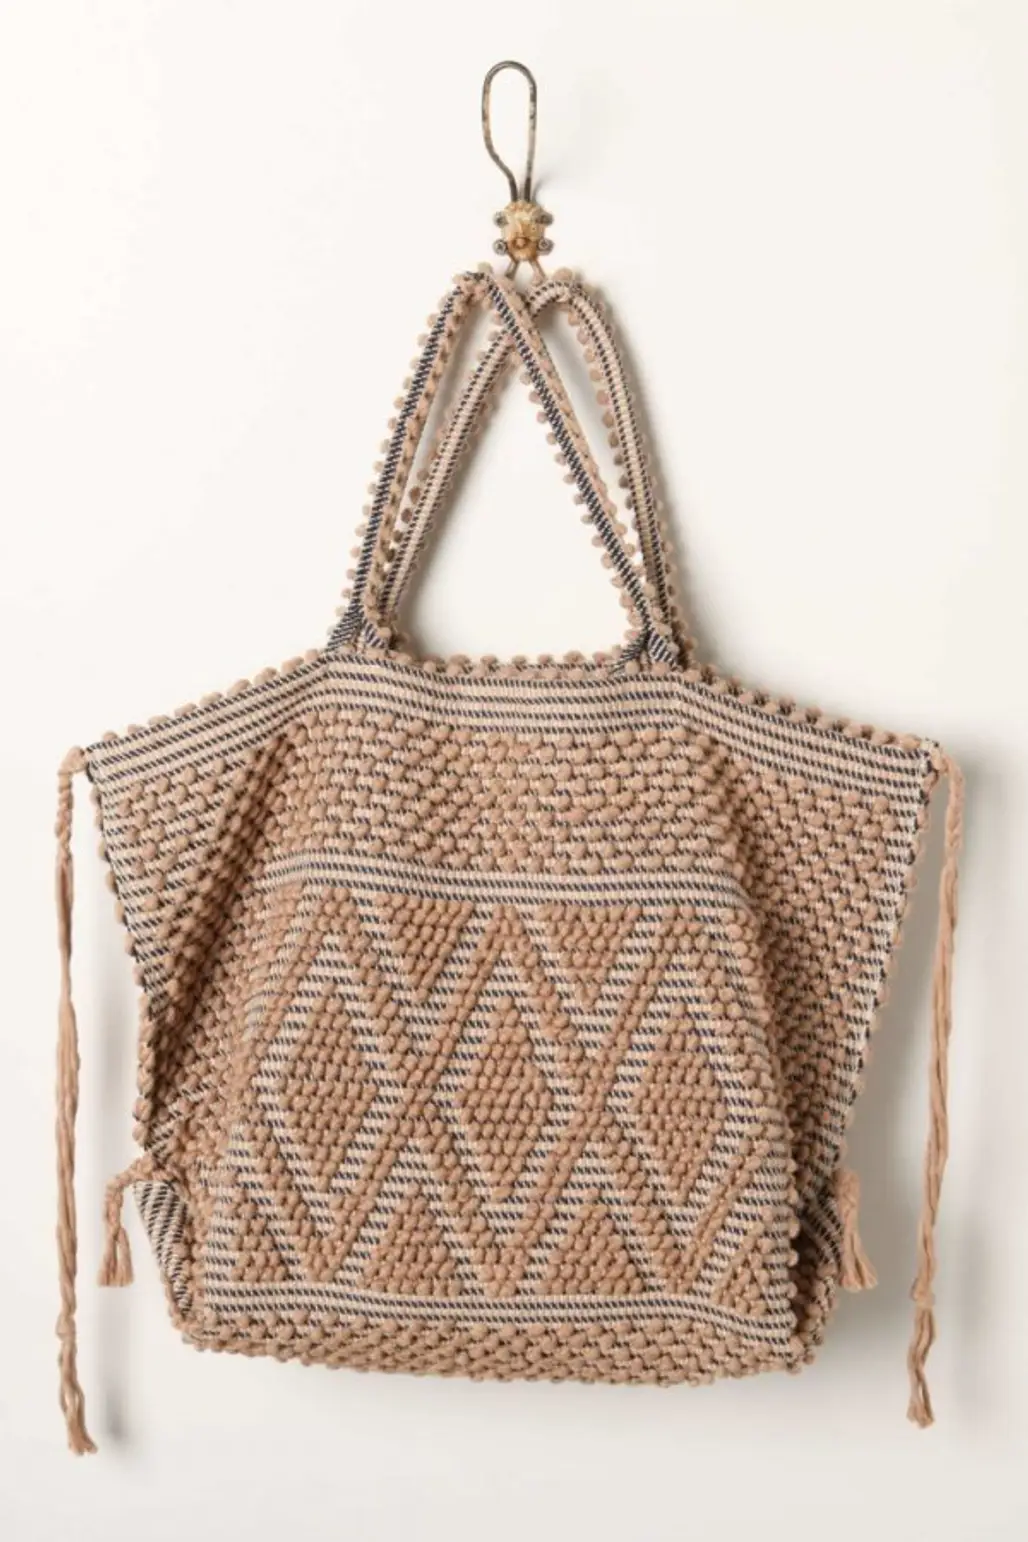 Intertwined Traditions Tote